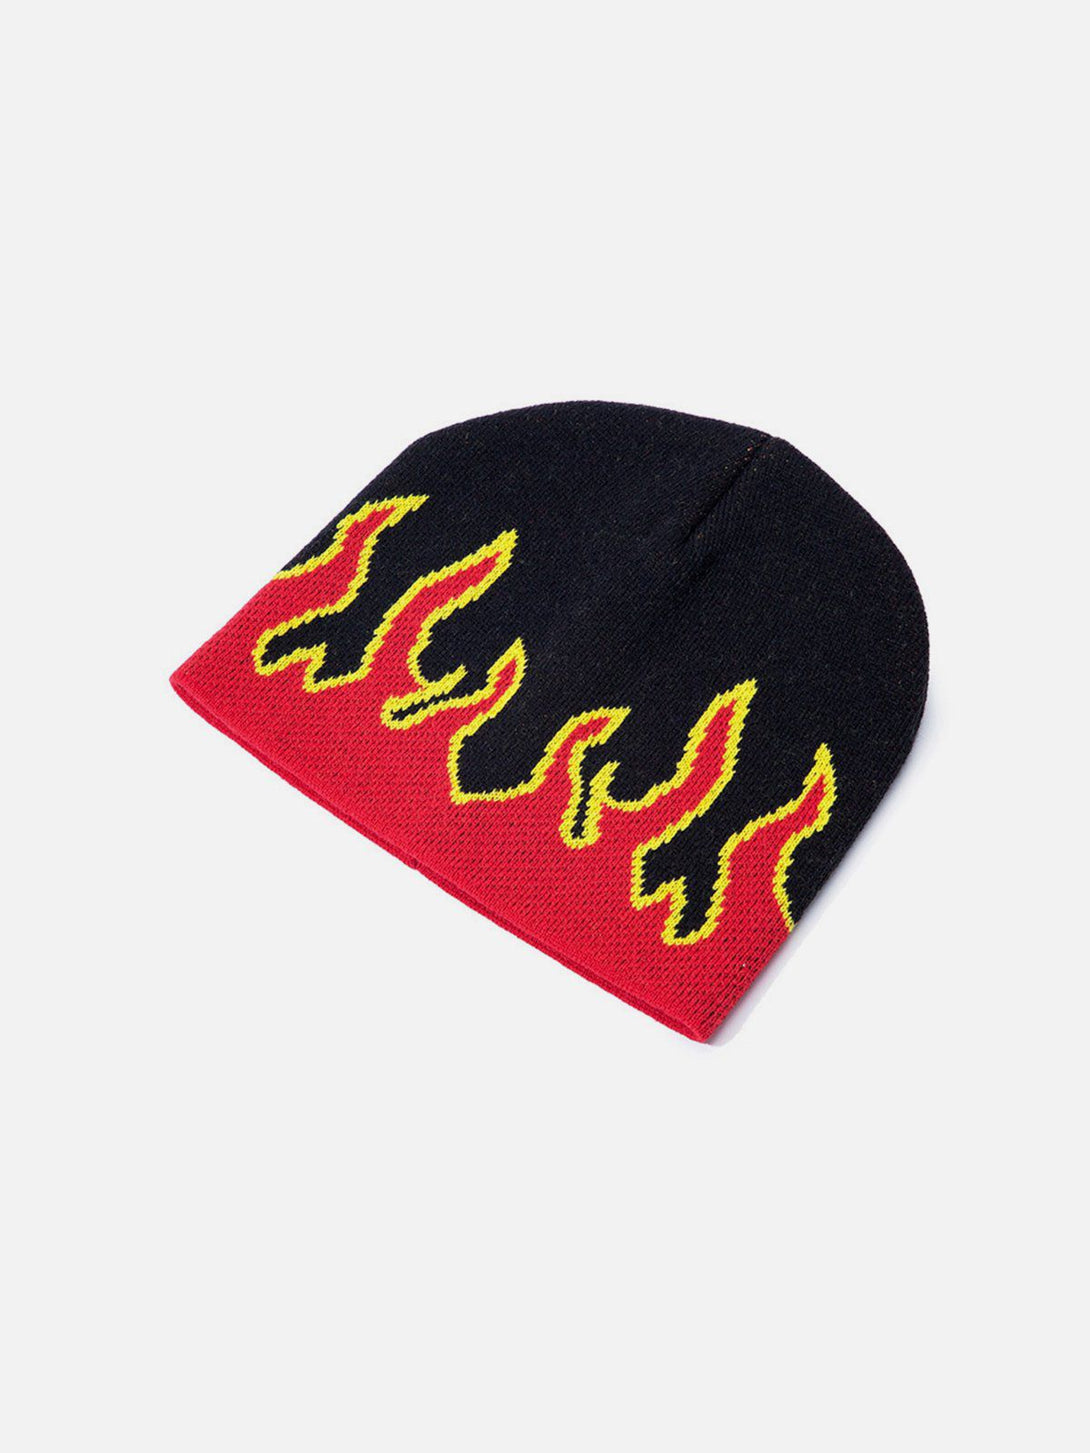 Levefly - Flame Elements Hat - Streetwear Fashion - levefly.com